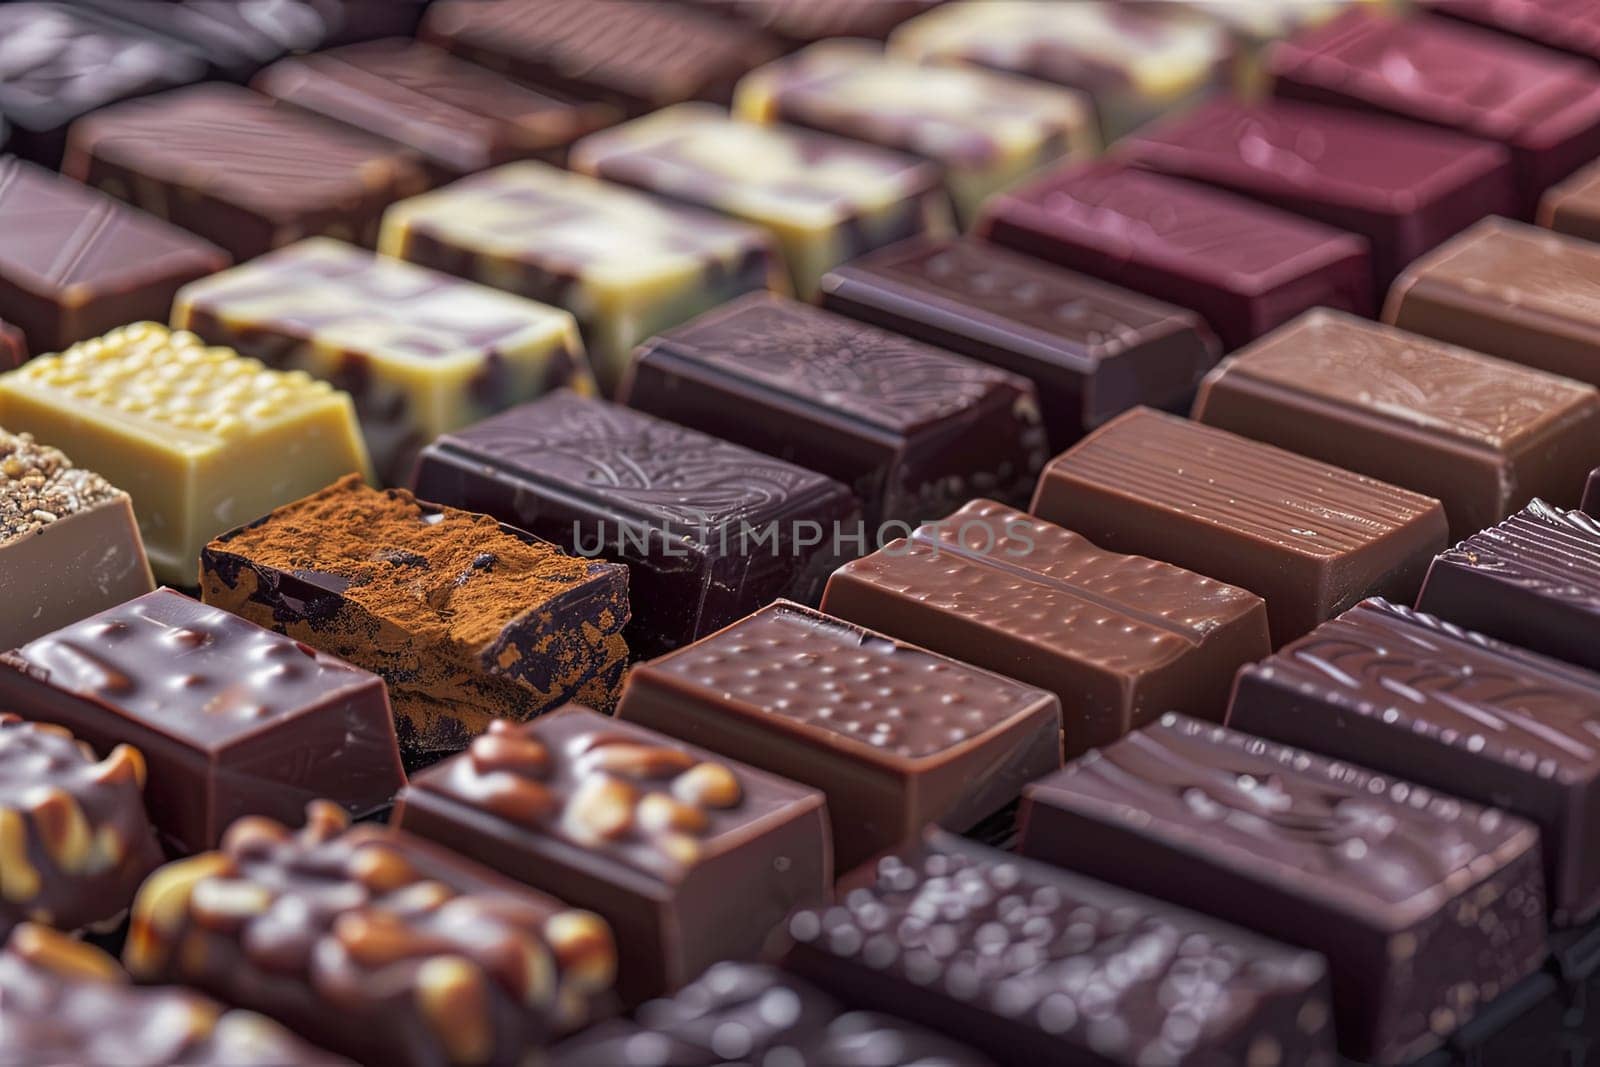 Close-up view of a variety of chocolate bars in different flavors and types, showcasing their rich colors and high detail.